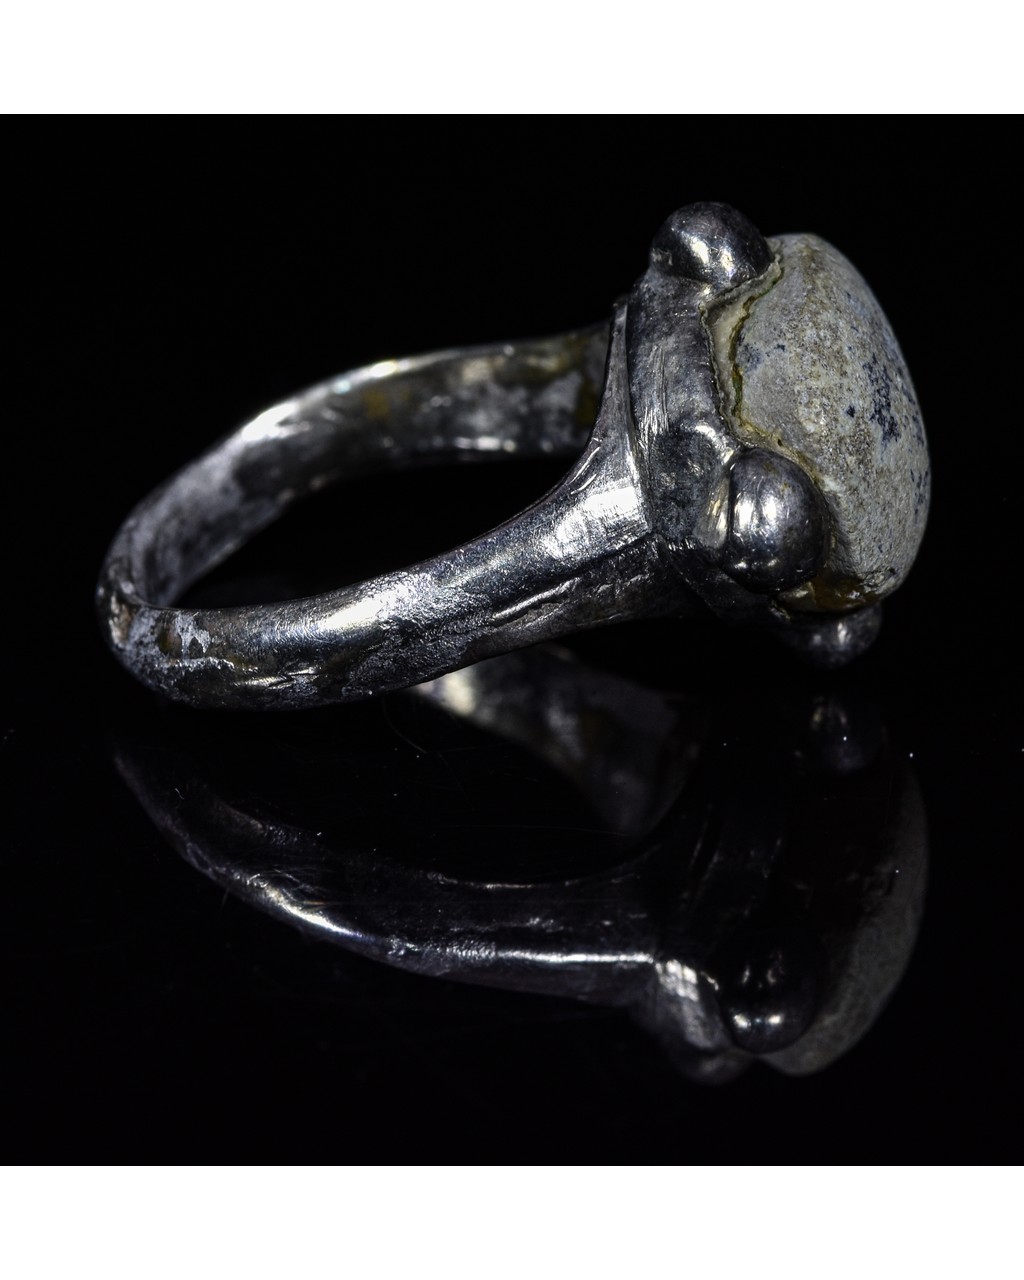 VIKING PERIOD SILVER RING WITH GEM - Image 4 of 4